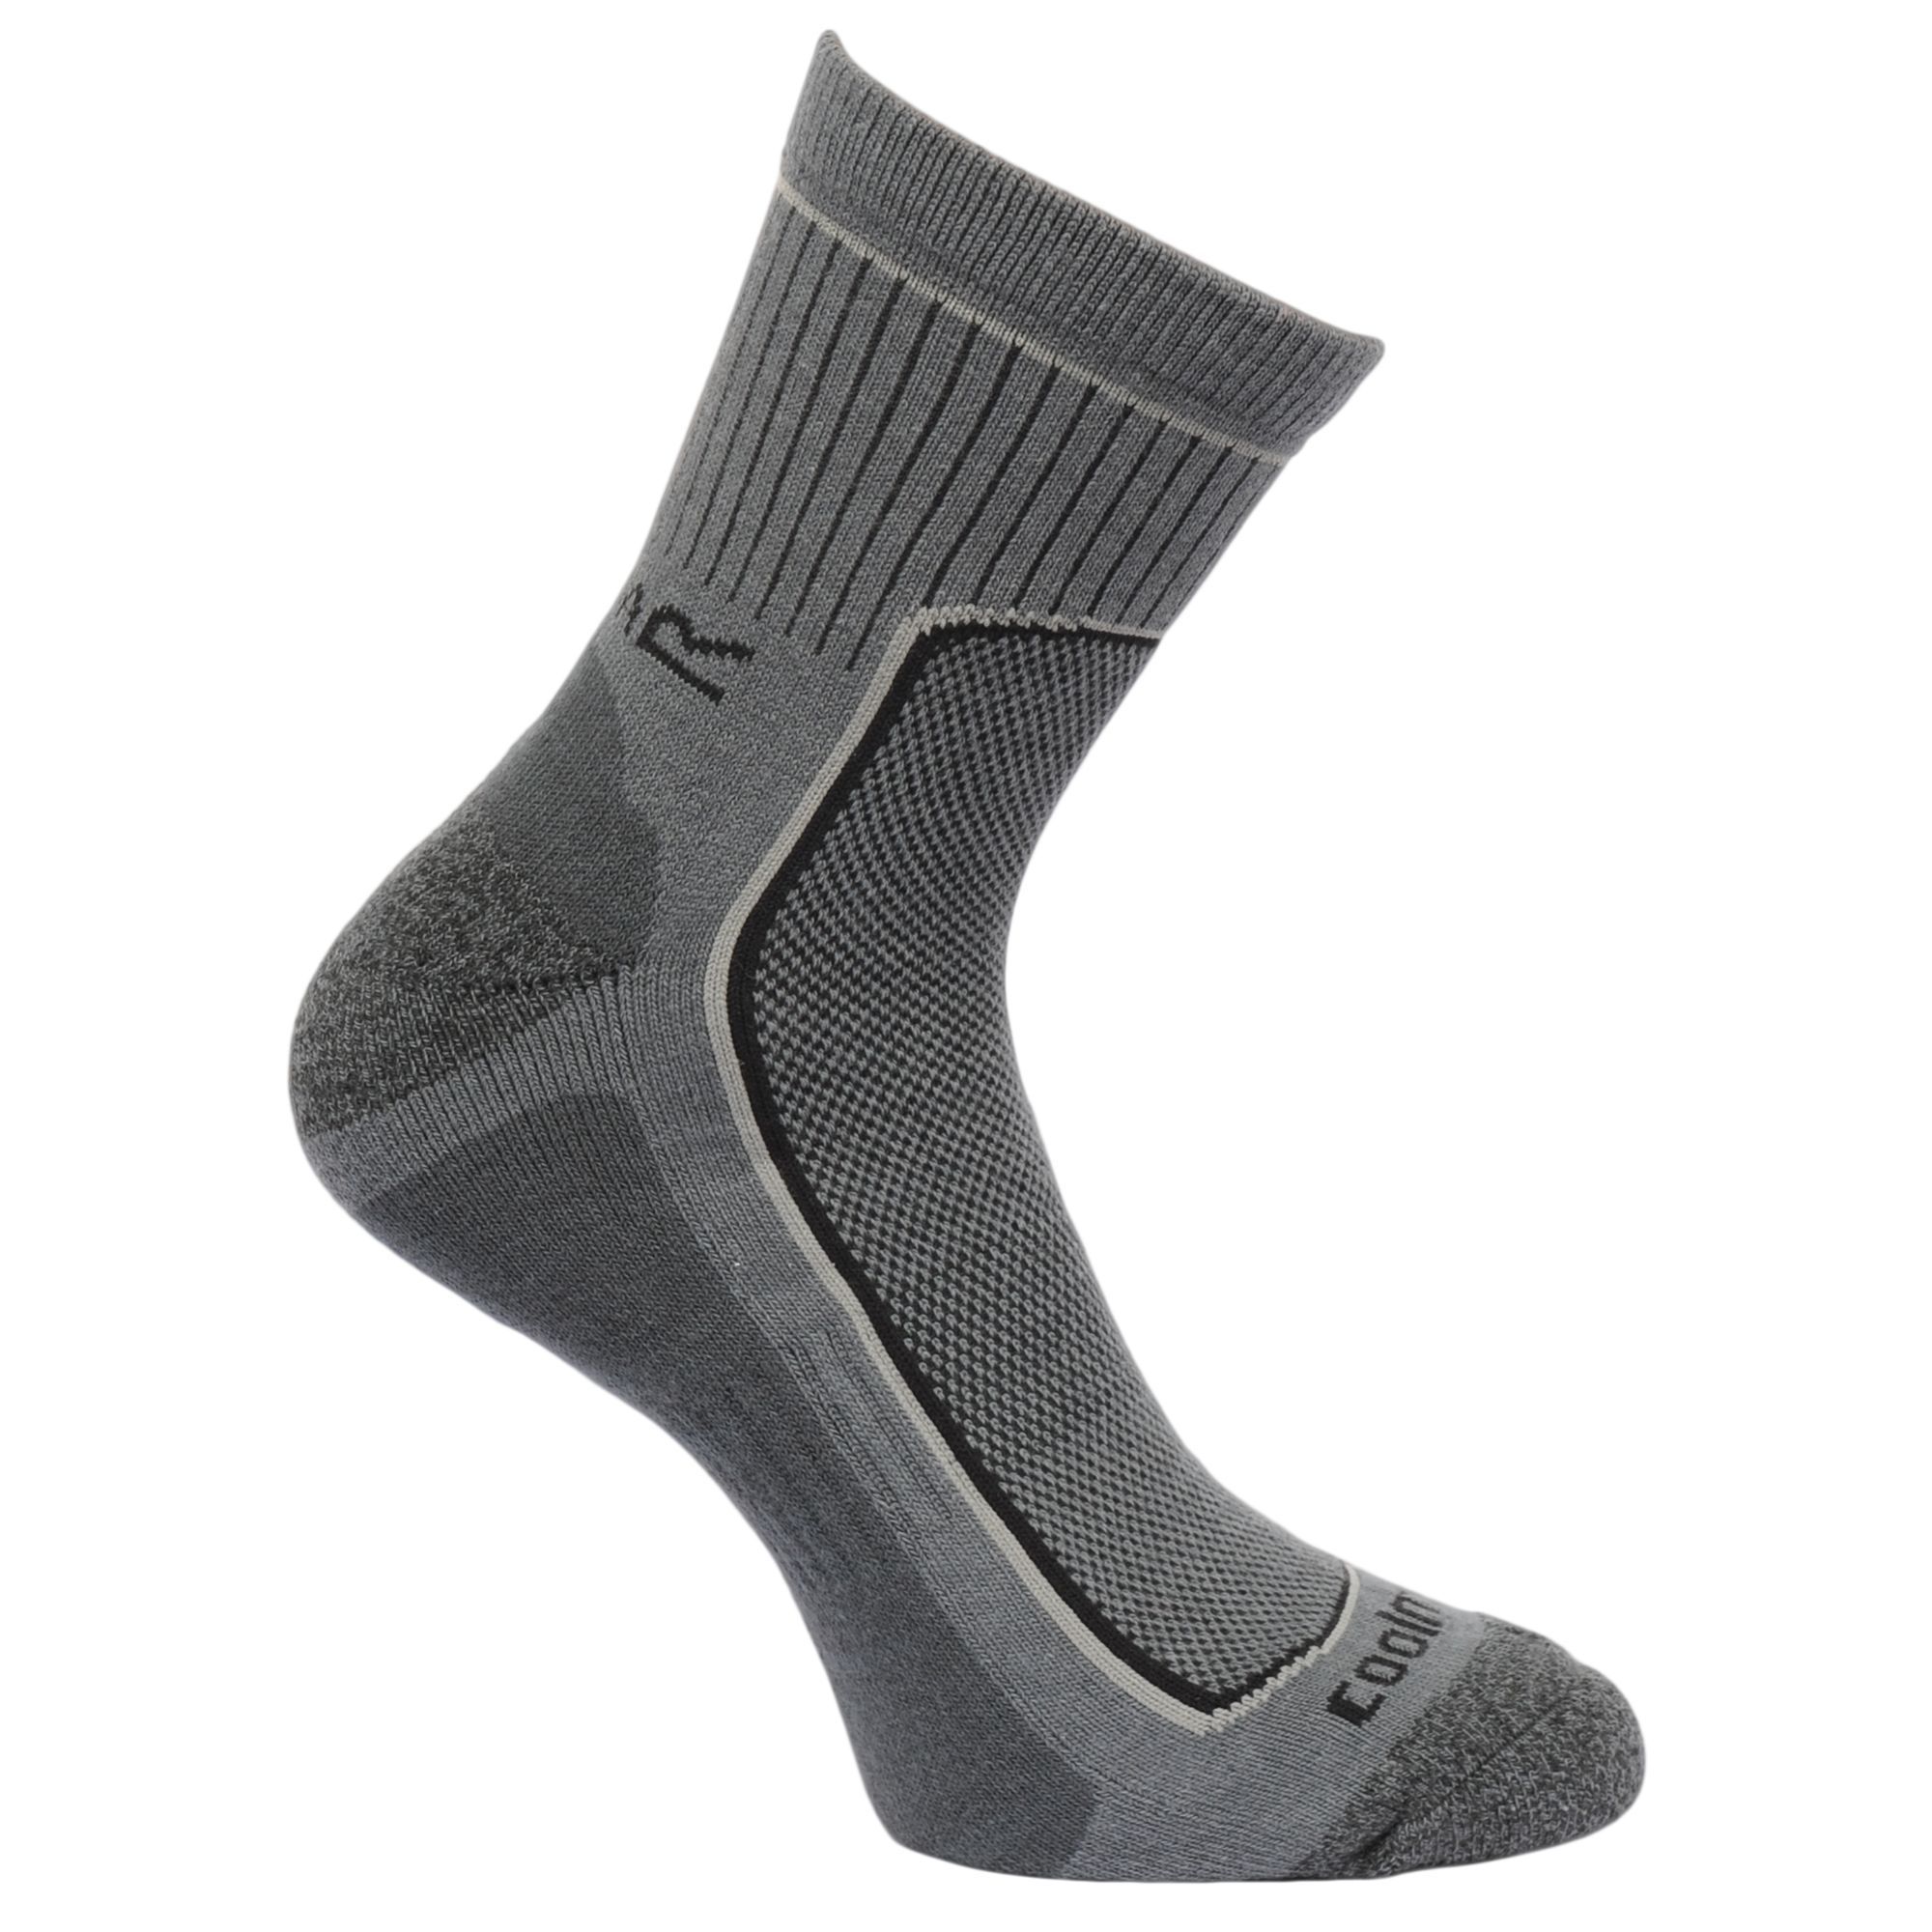 The mens Active Lifestyle Sock combines Coolmax fibres with a natural and synthetic blend for ultimate moisture-reducing comfort. Lightly cushioned to prevent rubbing, this comfy everyday pair come delivered in packs of two. Coolmax 38%, Cotton 35%, Polyester 15%, Polyamide 10%, Elastane 2%.